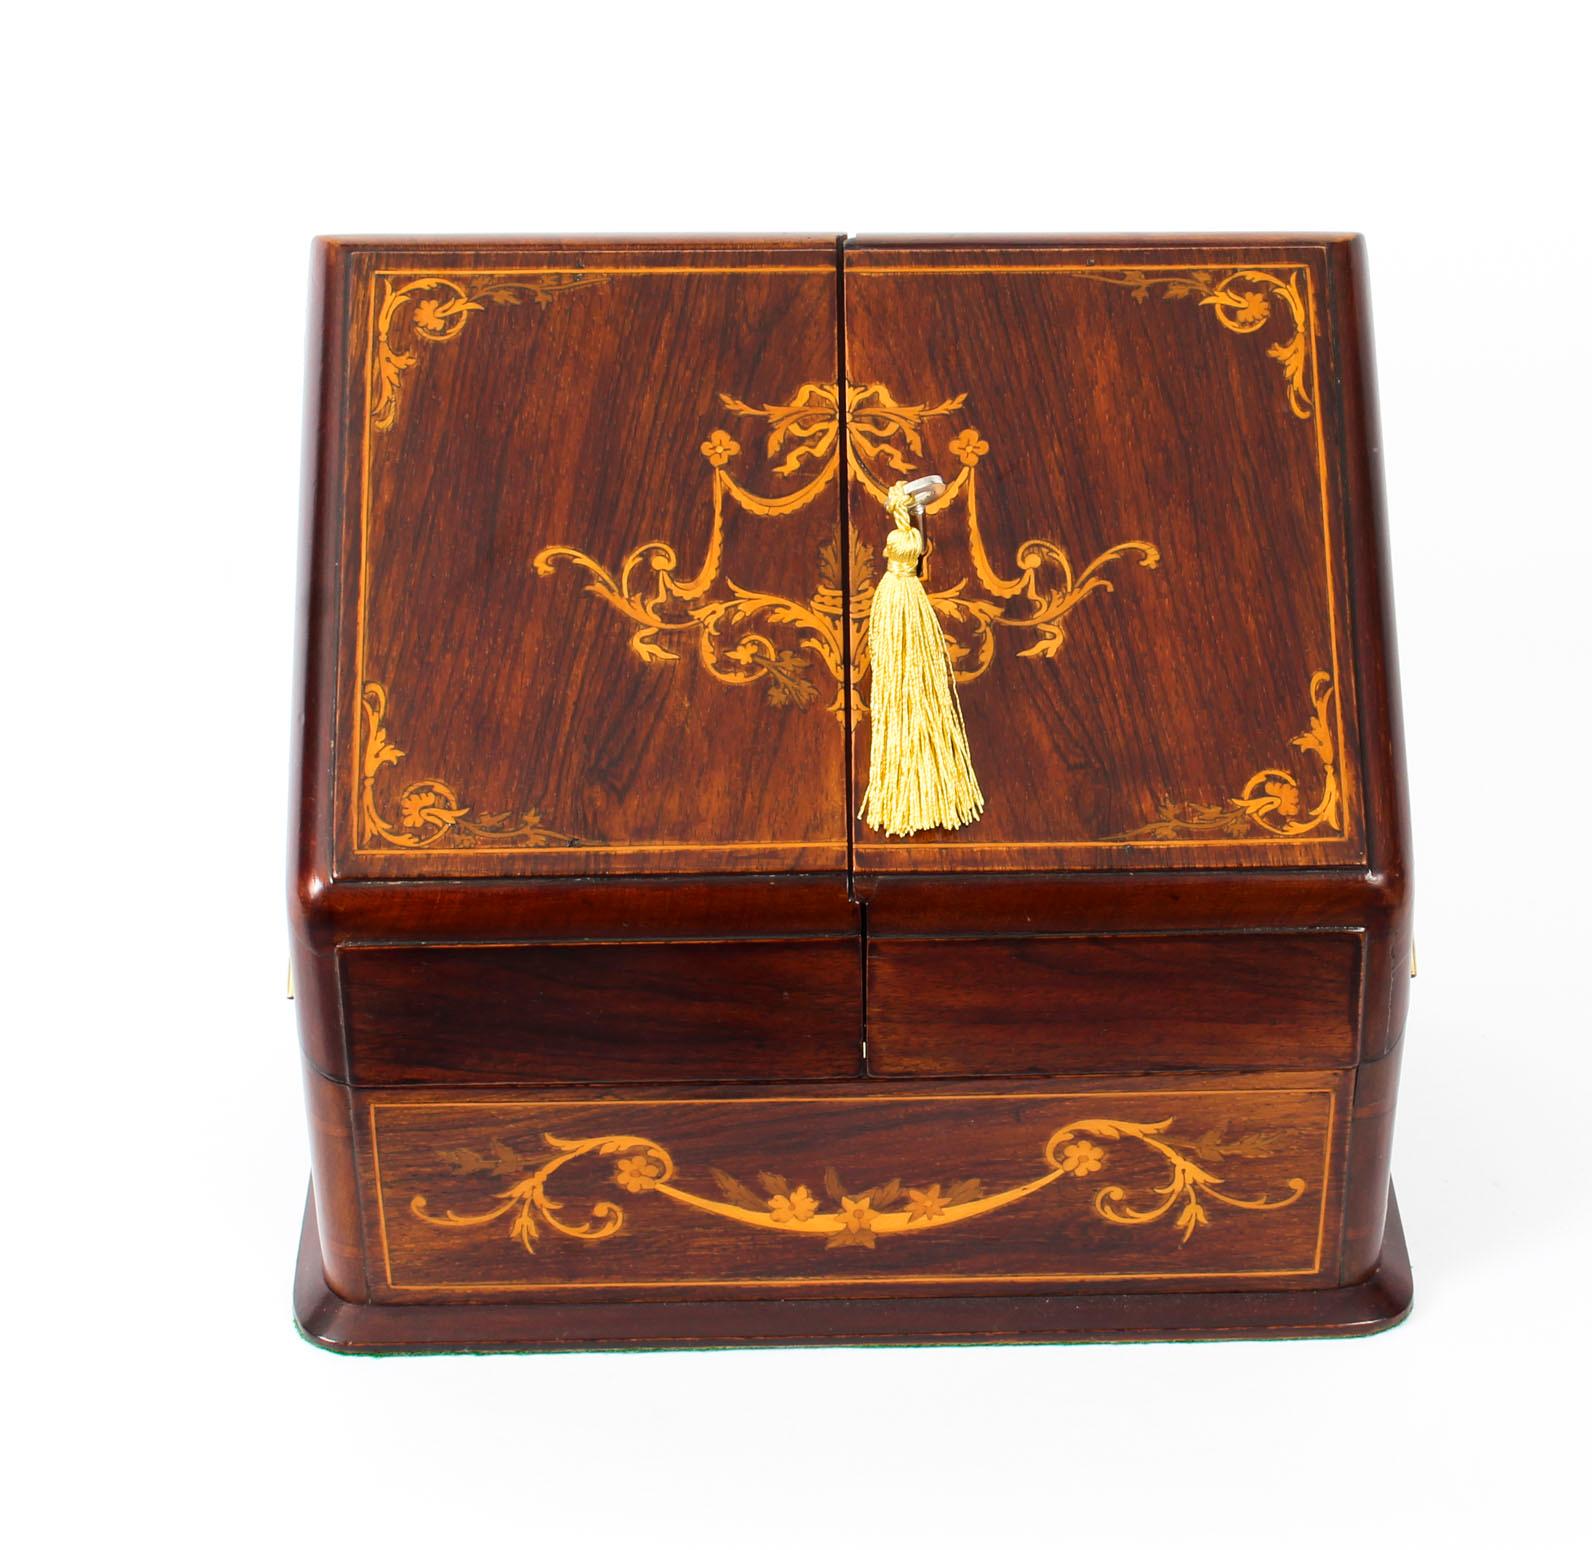 Victorian rosewood, mahogany, marquetry and penwork stationery box , circa 1880

the hinged and divided slant front decorated with ribbon tied swags and scrolls, opening to a compartmented interior and calendar date/year card inserts